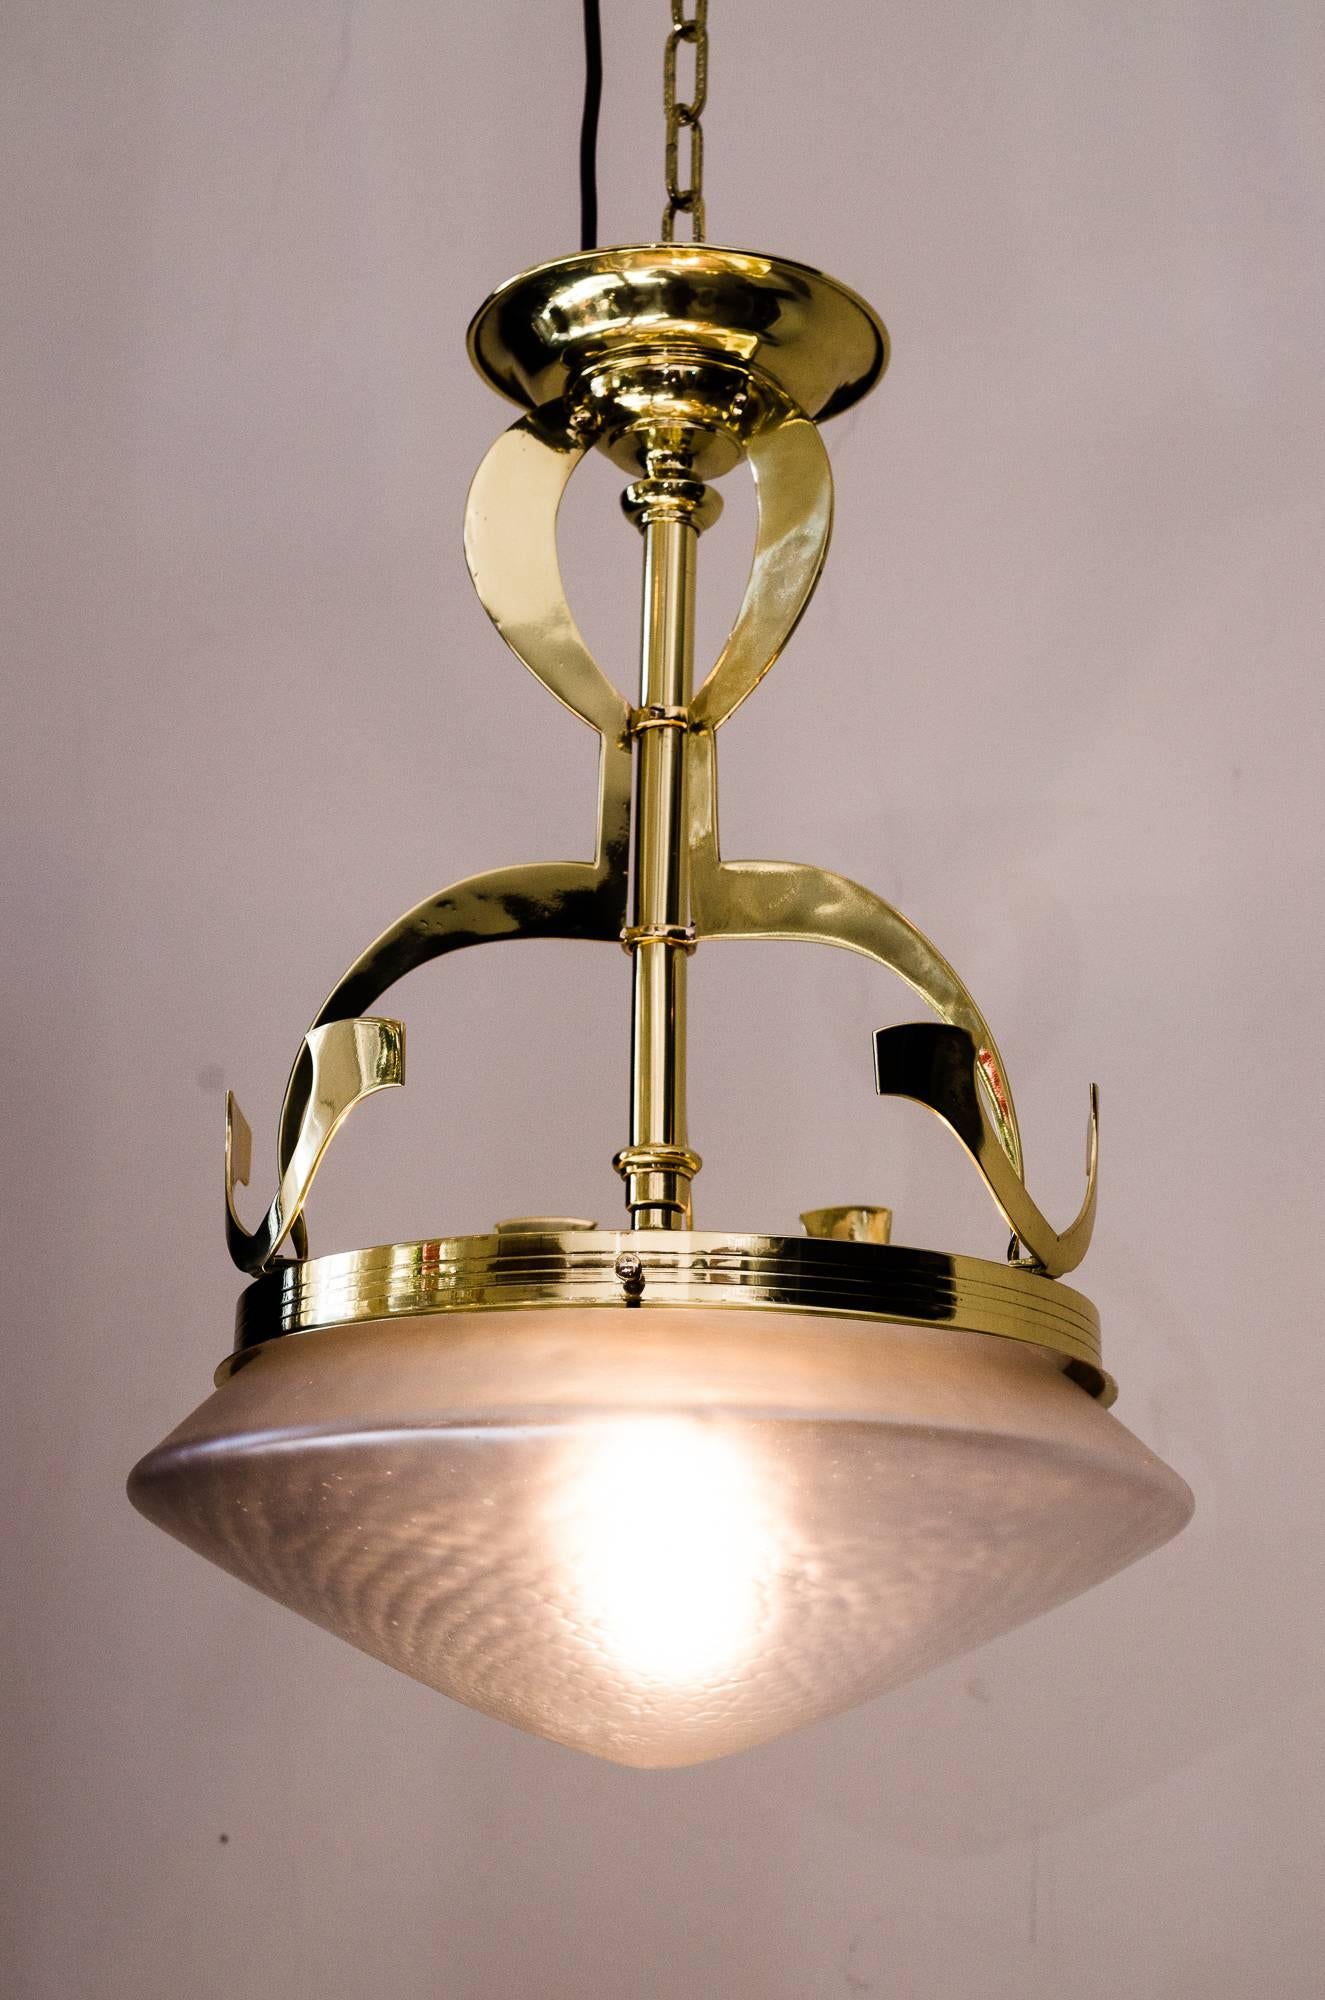 Lacquered Very Beautiful Jugendstil Ceiling Lamp, circa 1908